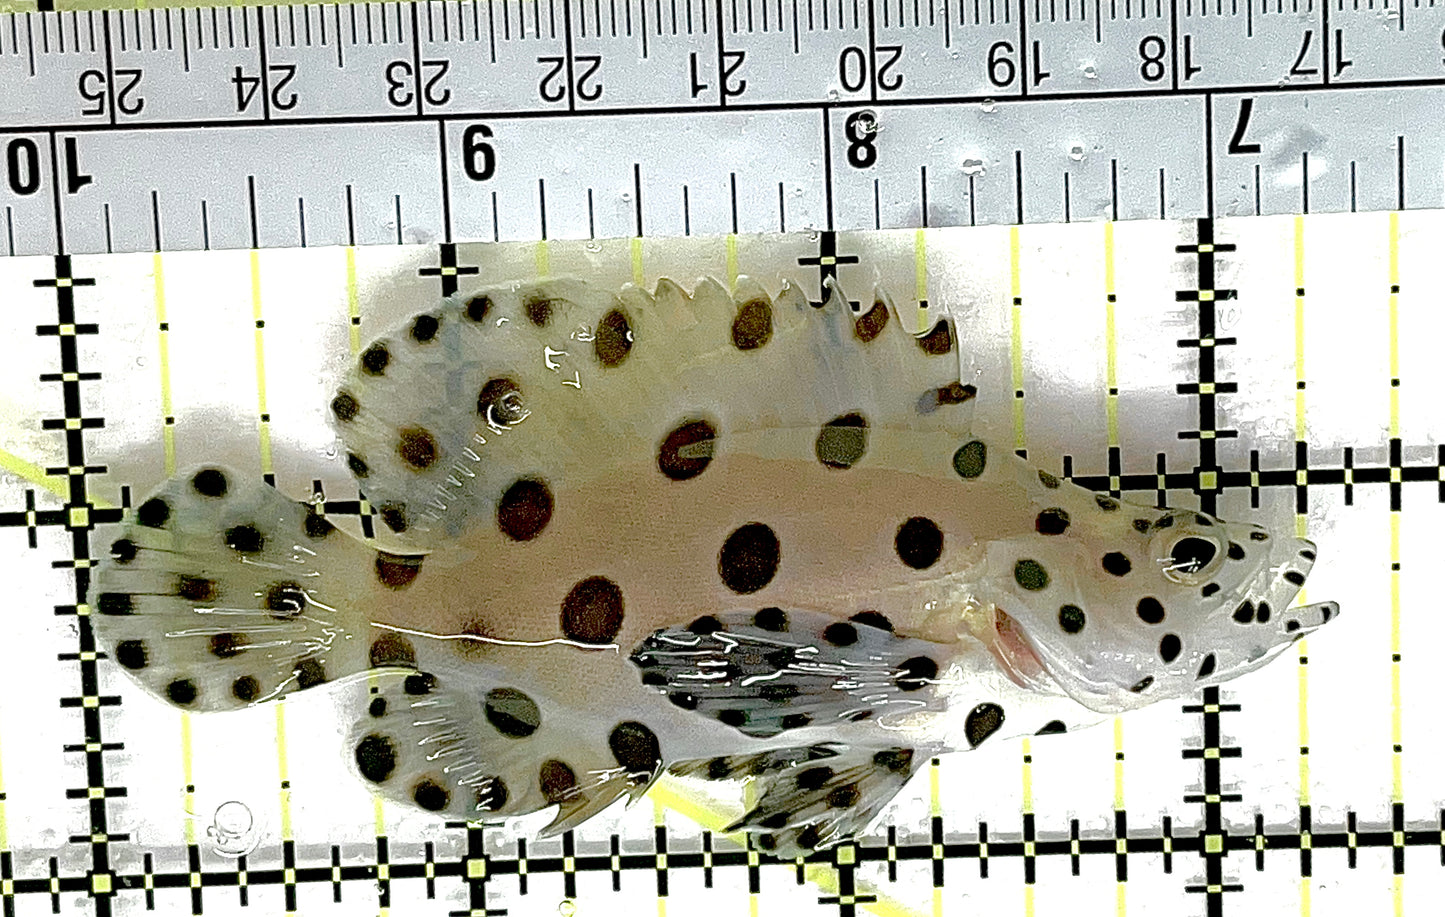 Panther Grouper PG021901 WYSIWYG Size: M 3.5" approx